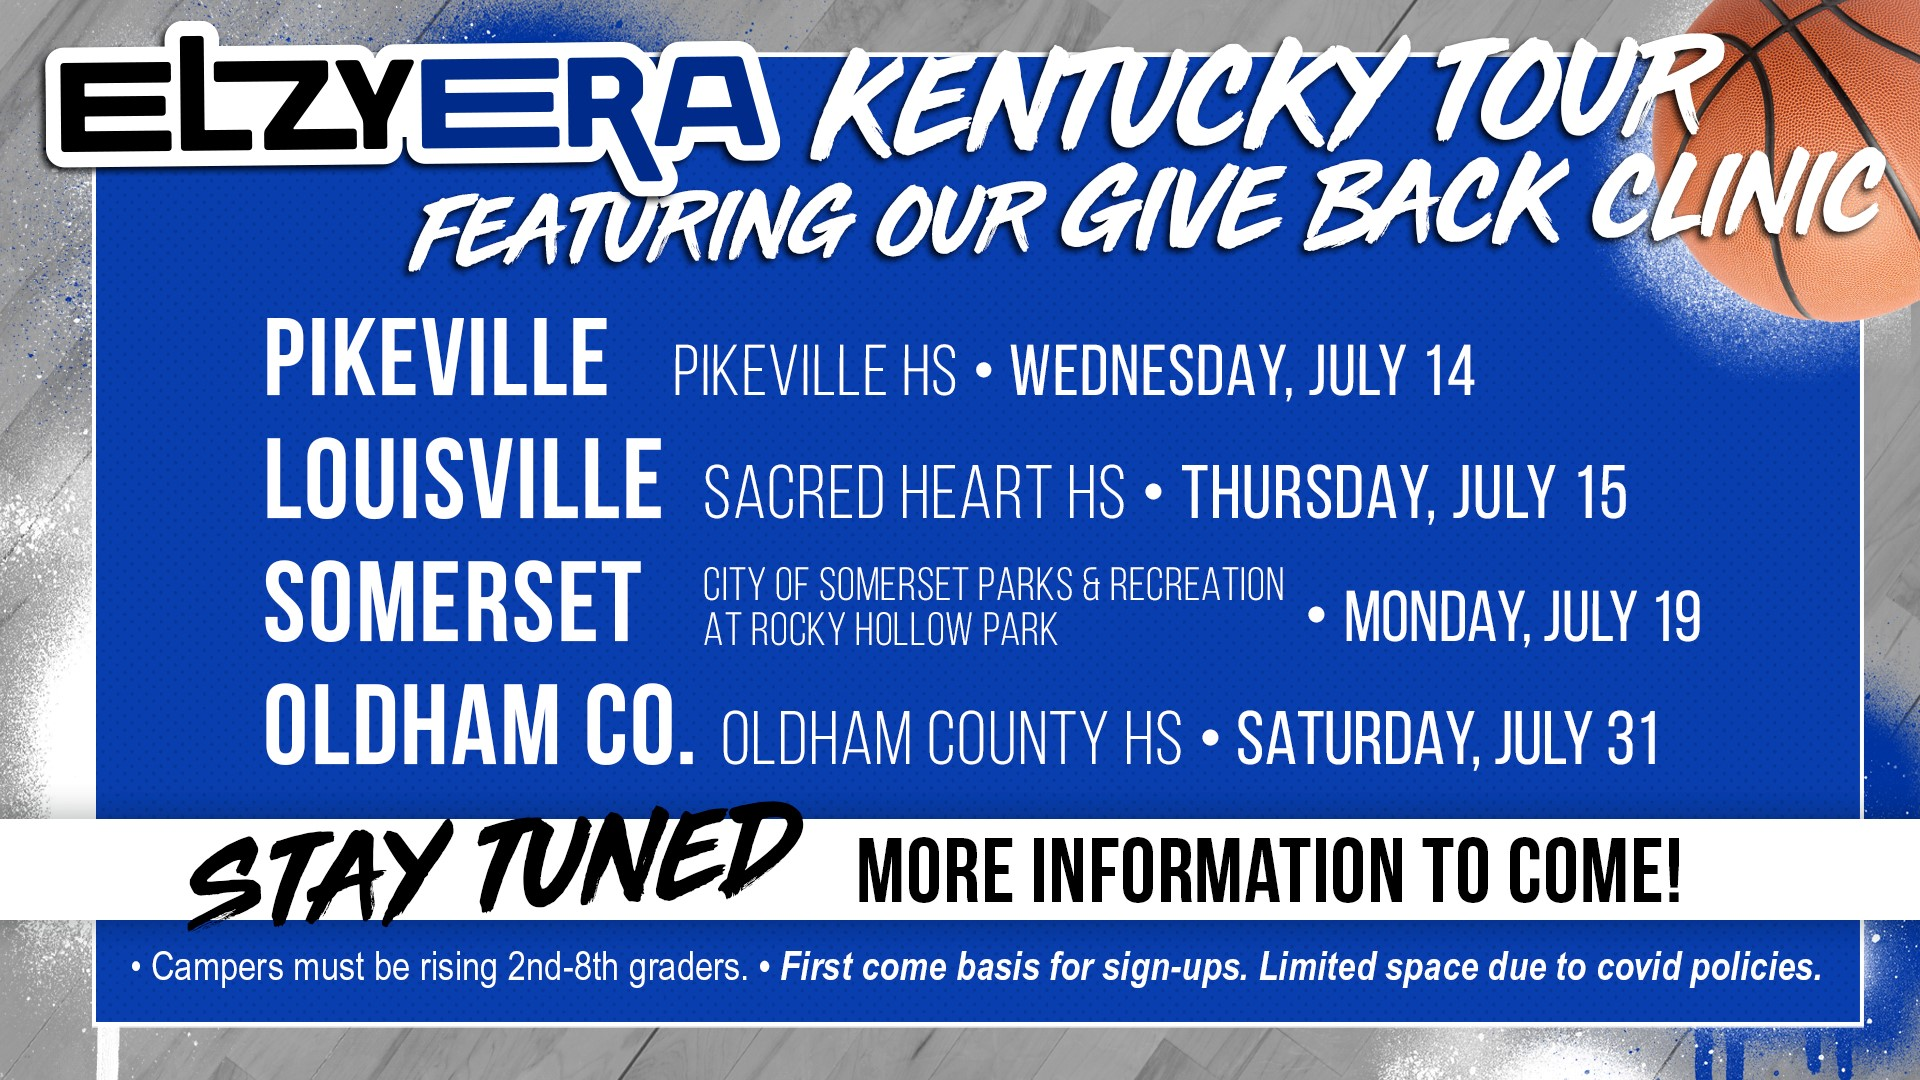 WBB Announces Kentucky Tour With Give Back Clinics